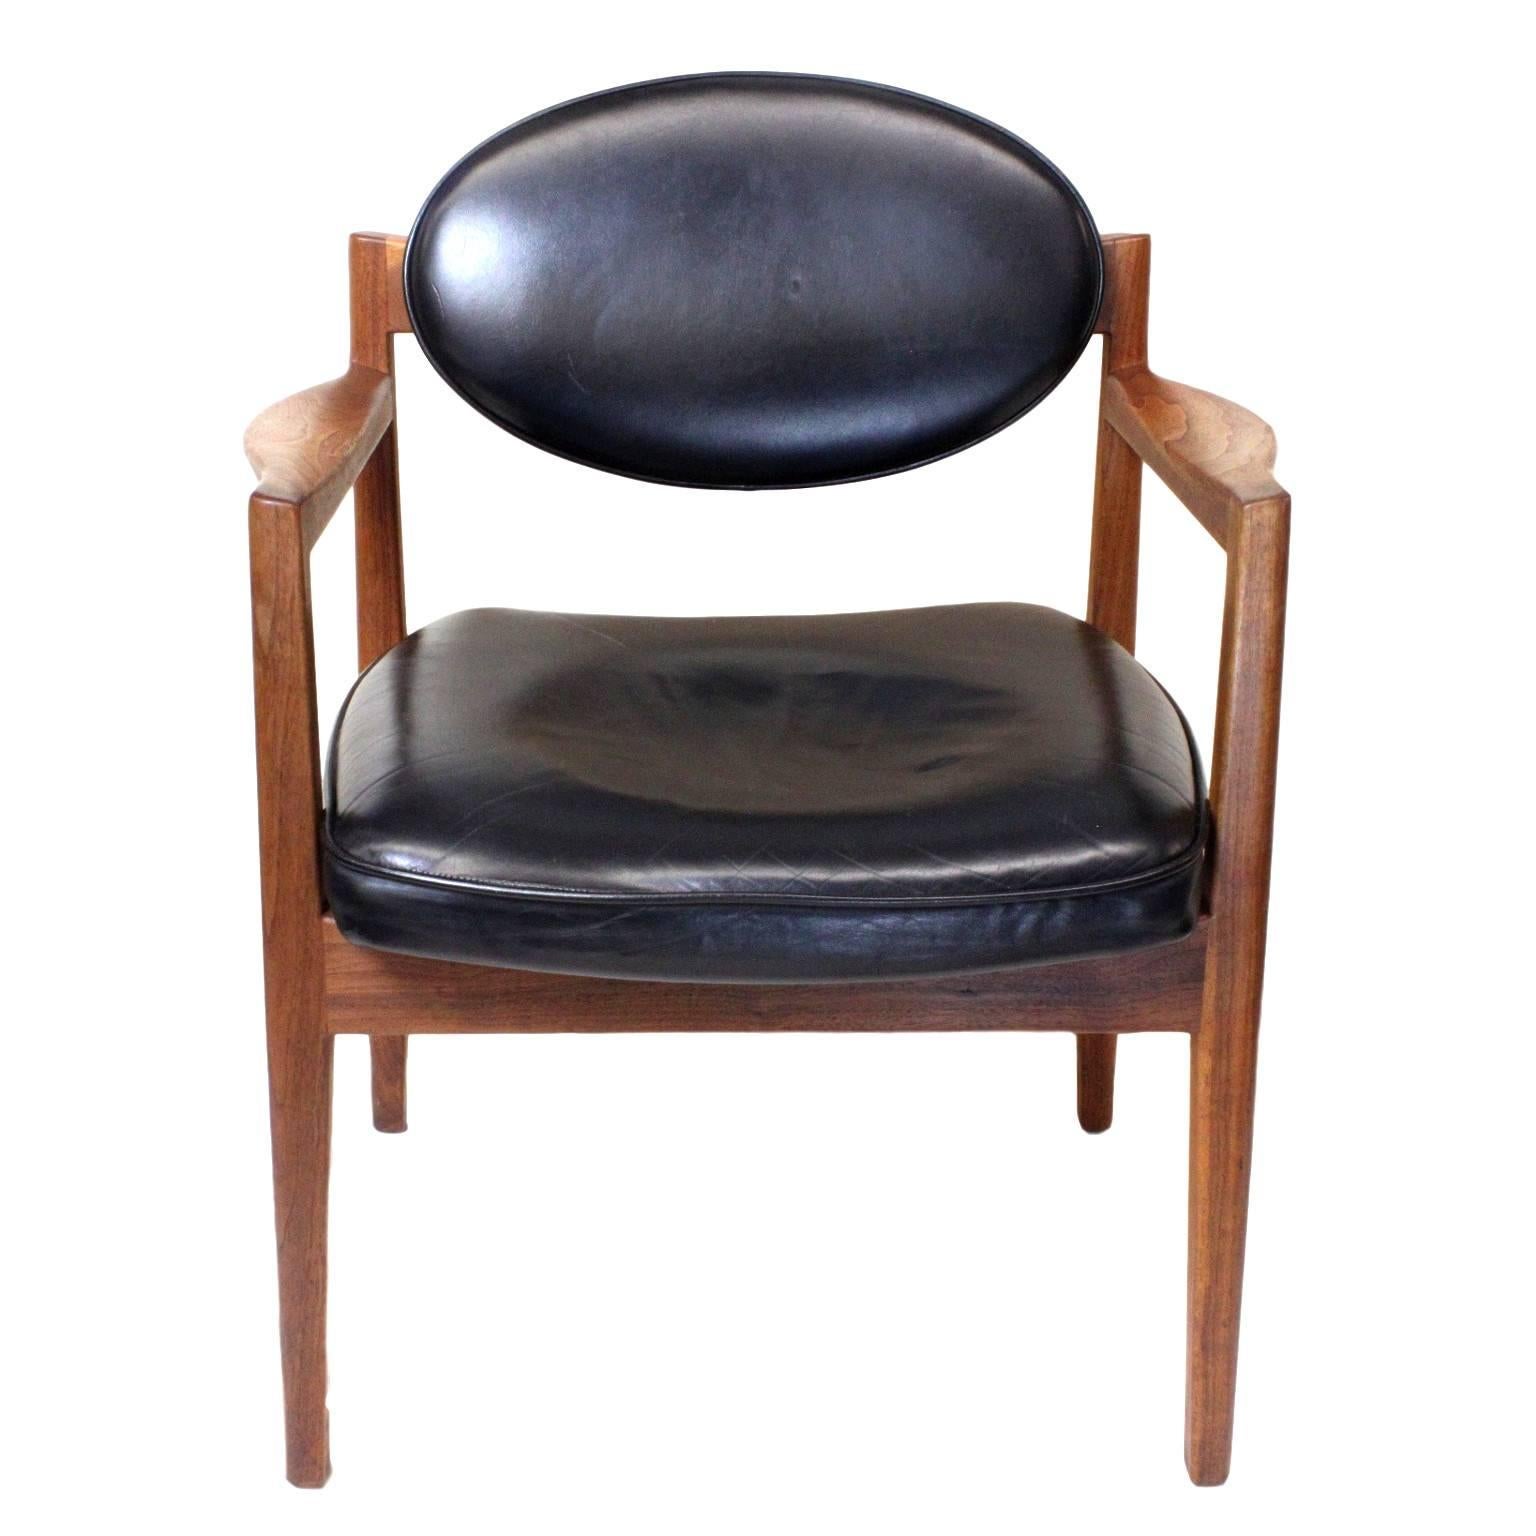 Mid-20th Century Pair of Mid-Century Modern Black Leather Oval-Back Armchairs by Jens Risom